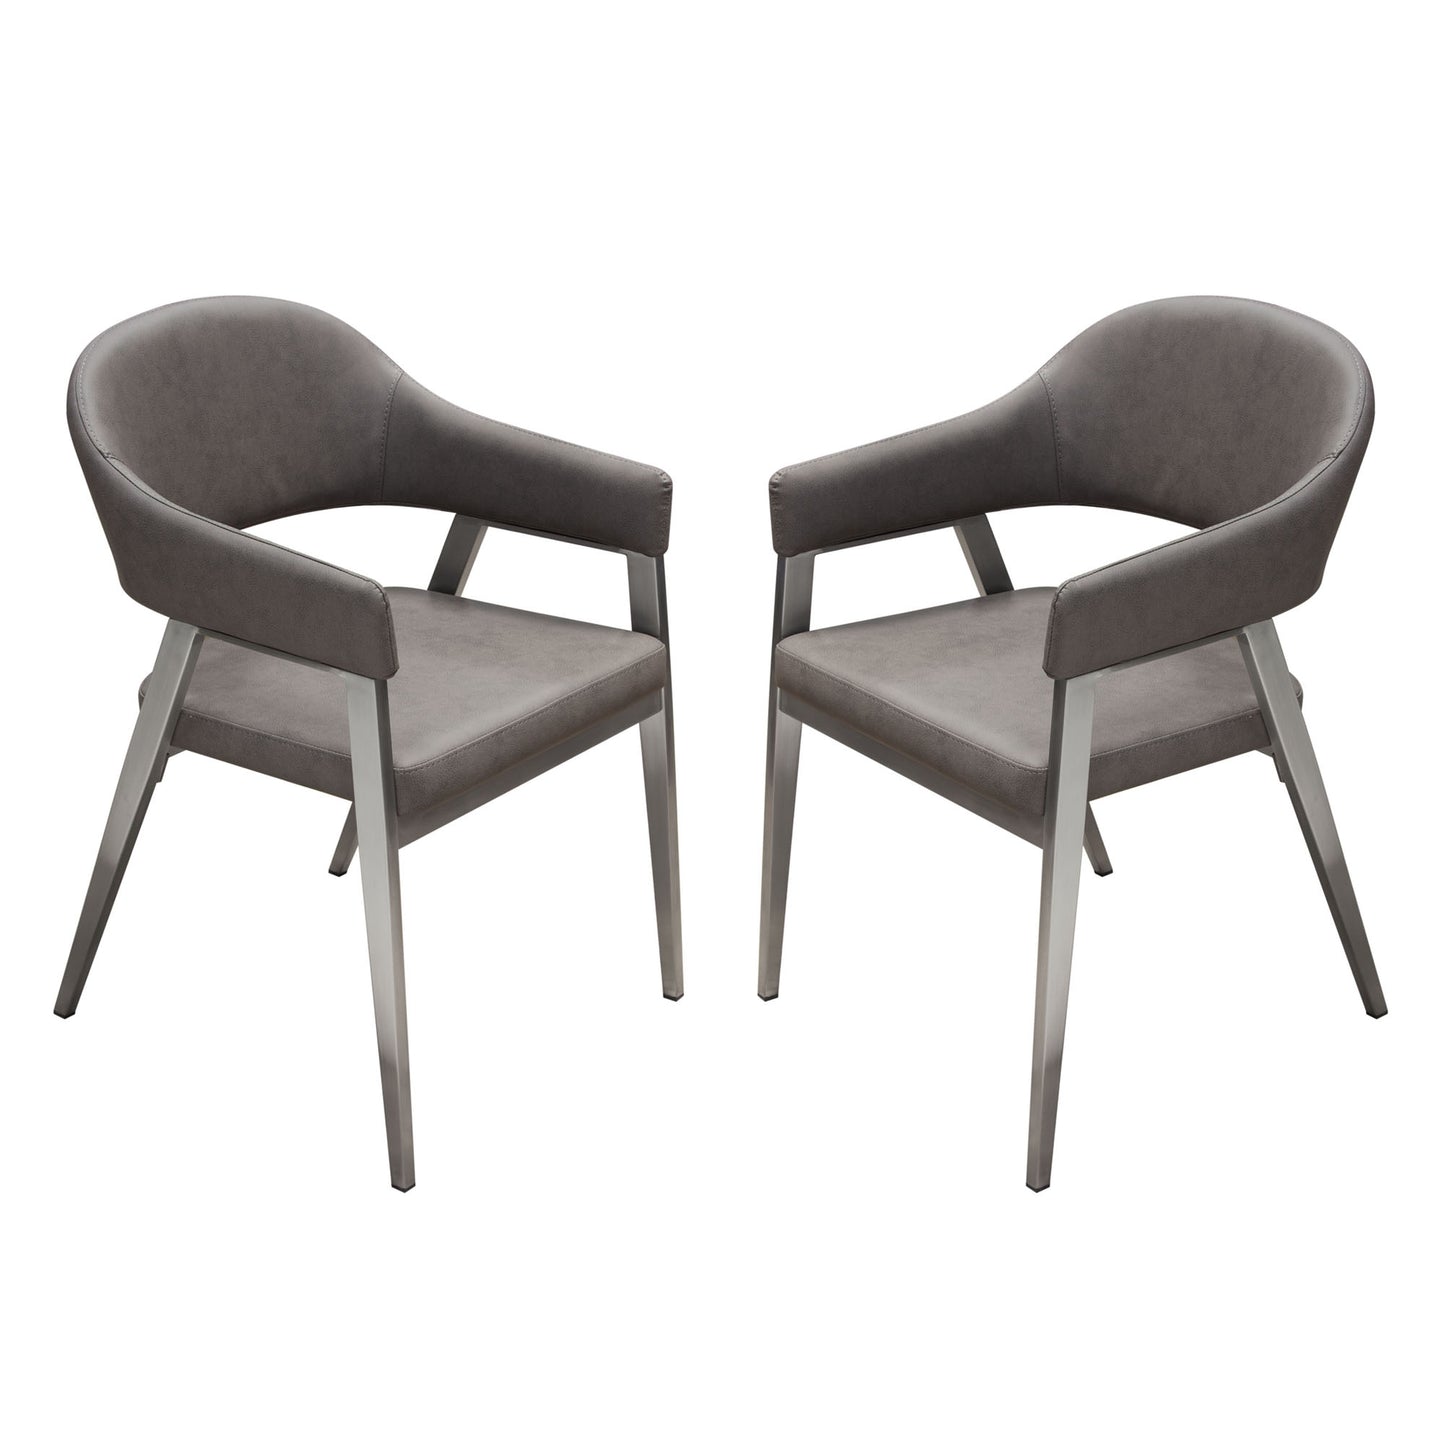 Adele Set of Two Dining/Accent Chairs in Grey Leatherette w/ Brushed Stainless Steel Leg